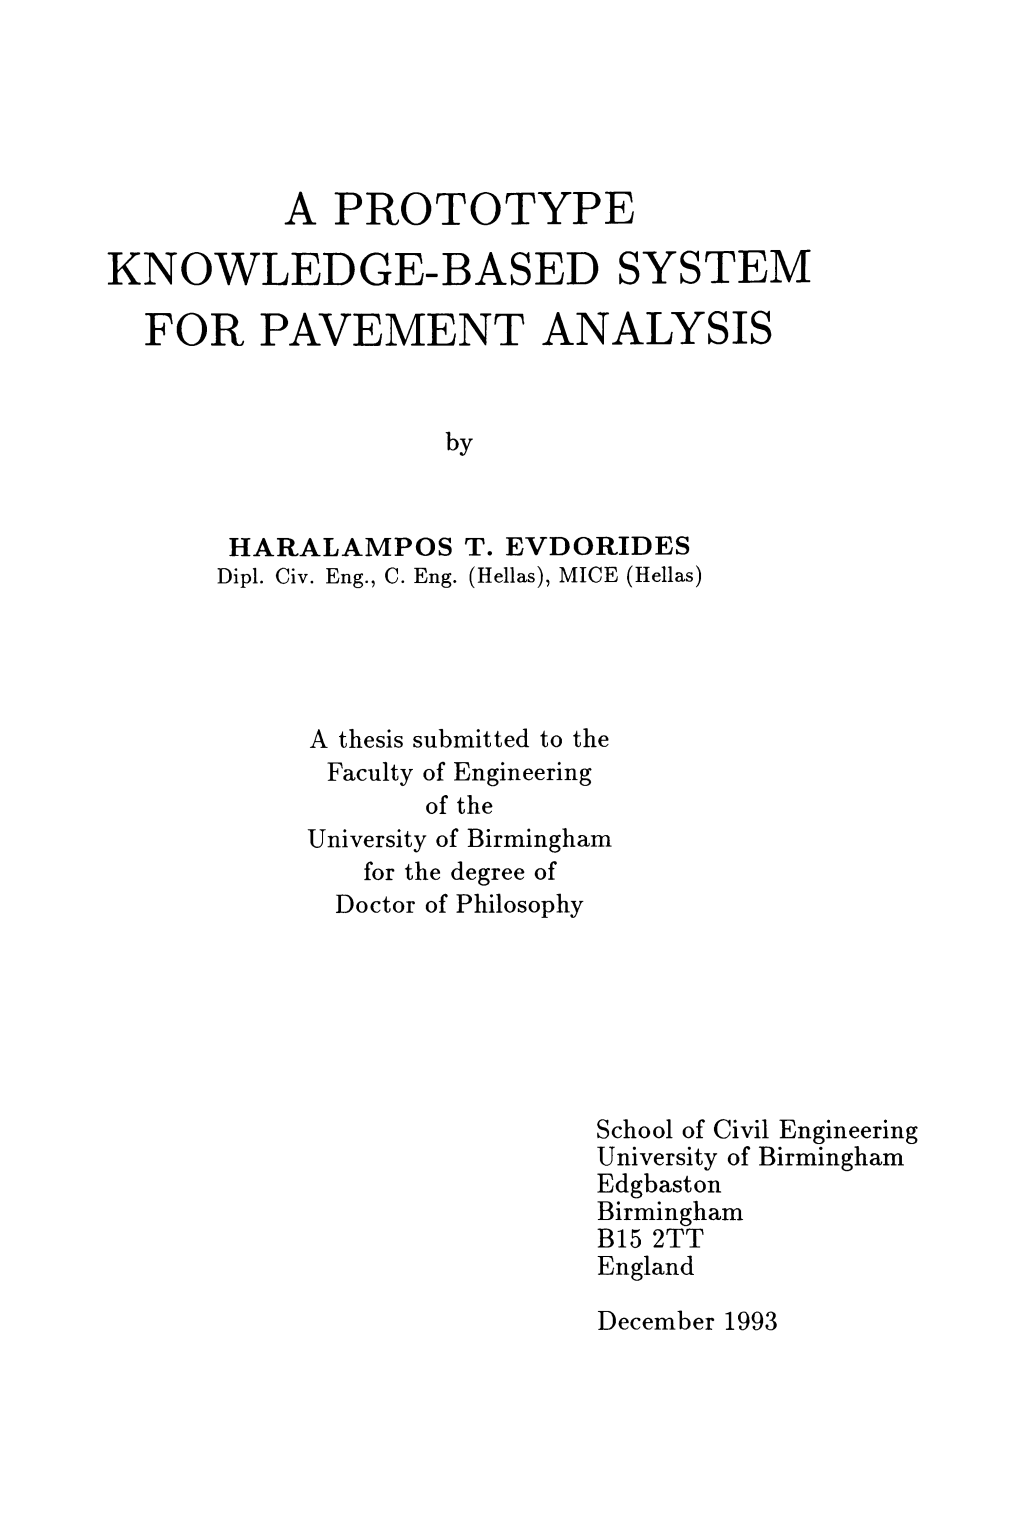 A Prototype Knowledge-Based System for Pavement Analysis